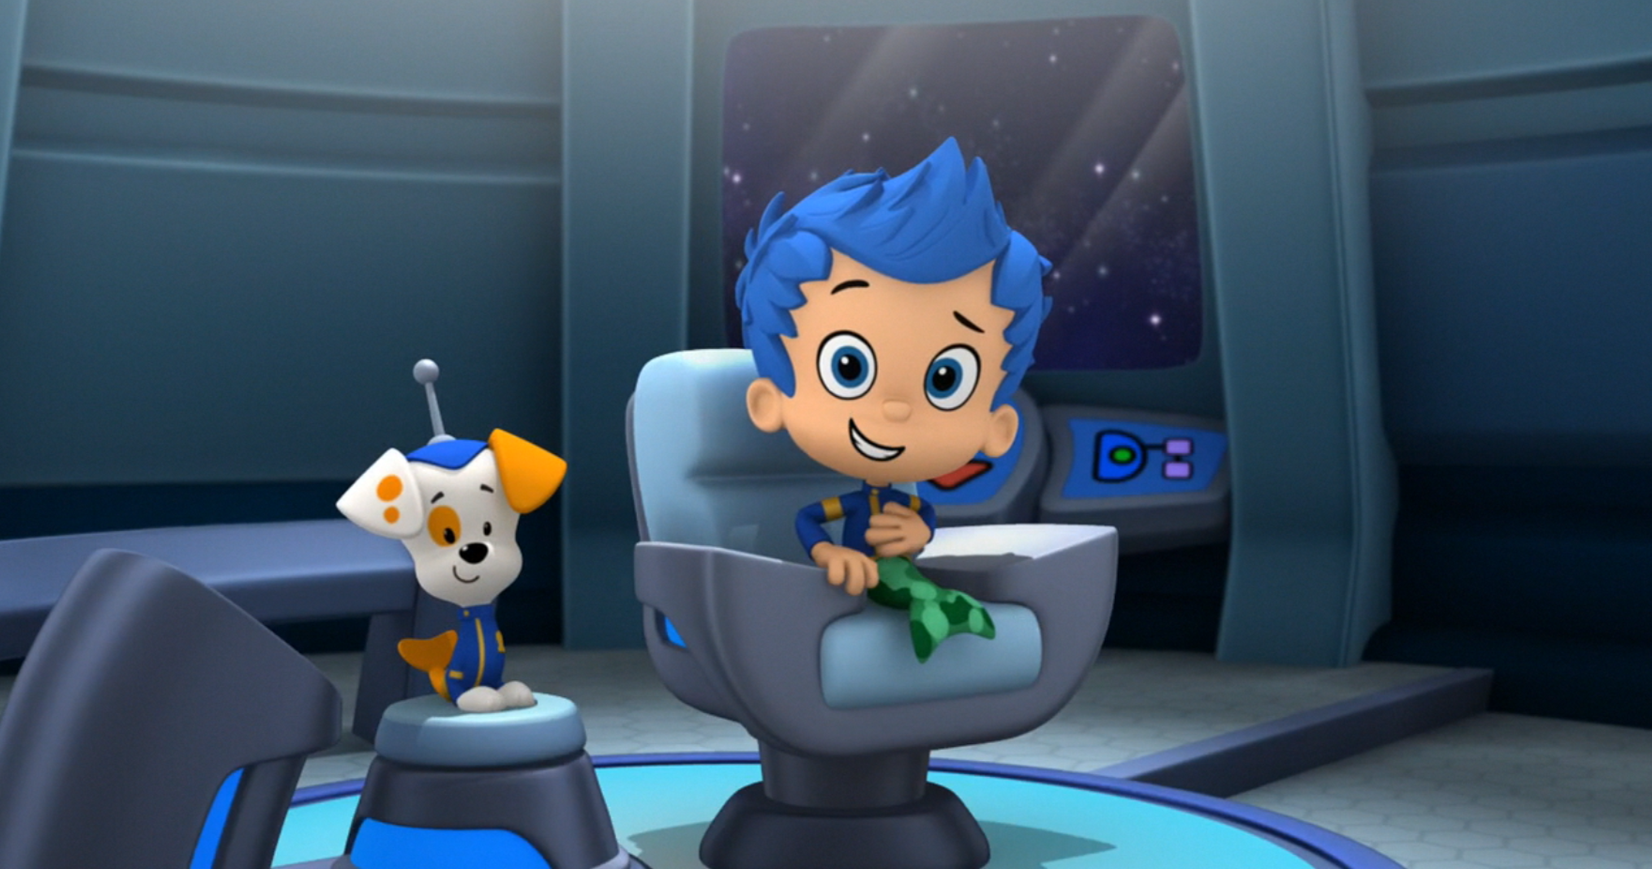 Space Guppies!/Images | Bubble Guppies Wiki | FANDOM powered by Wikia1652 x 869